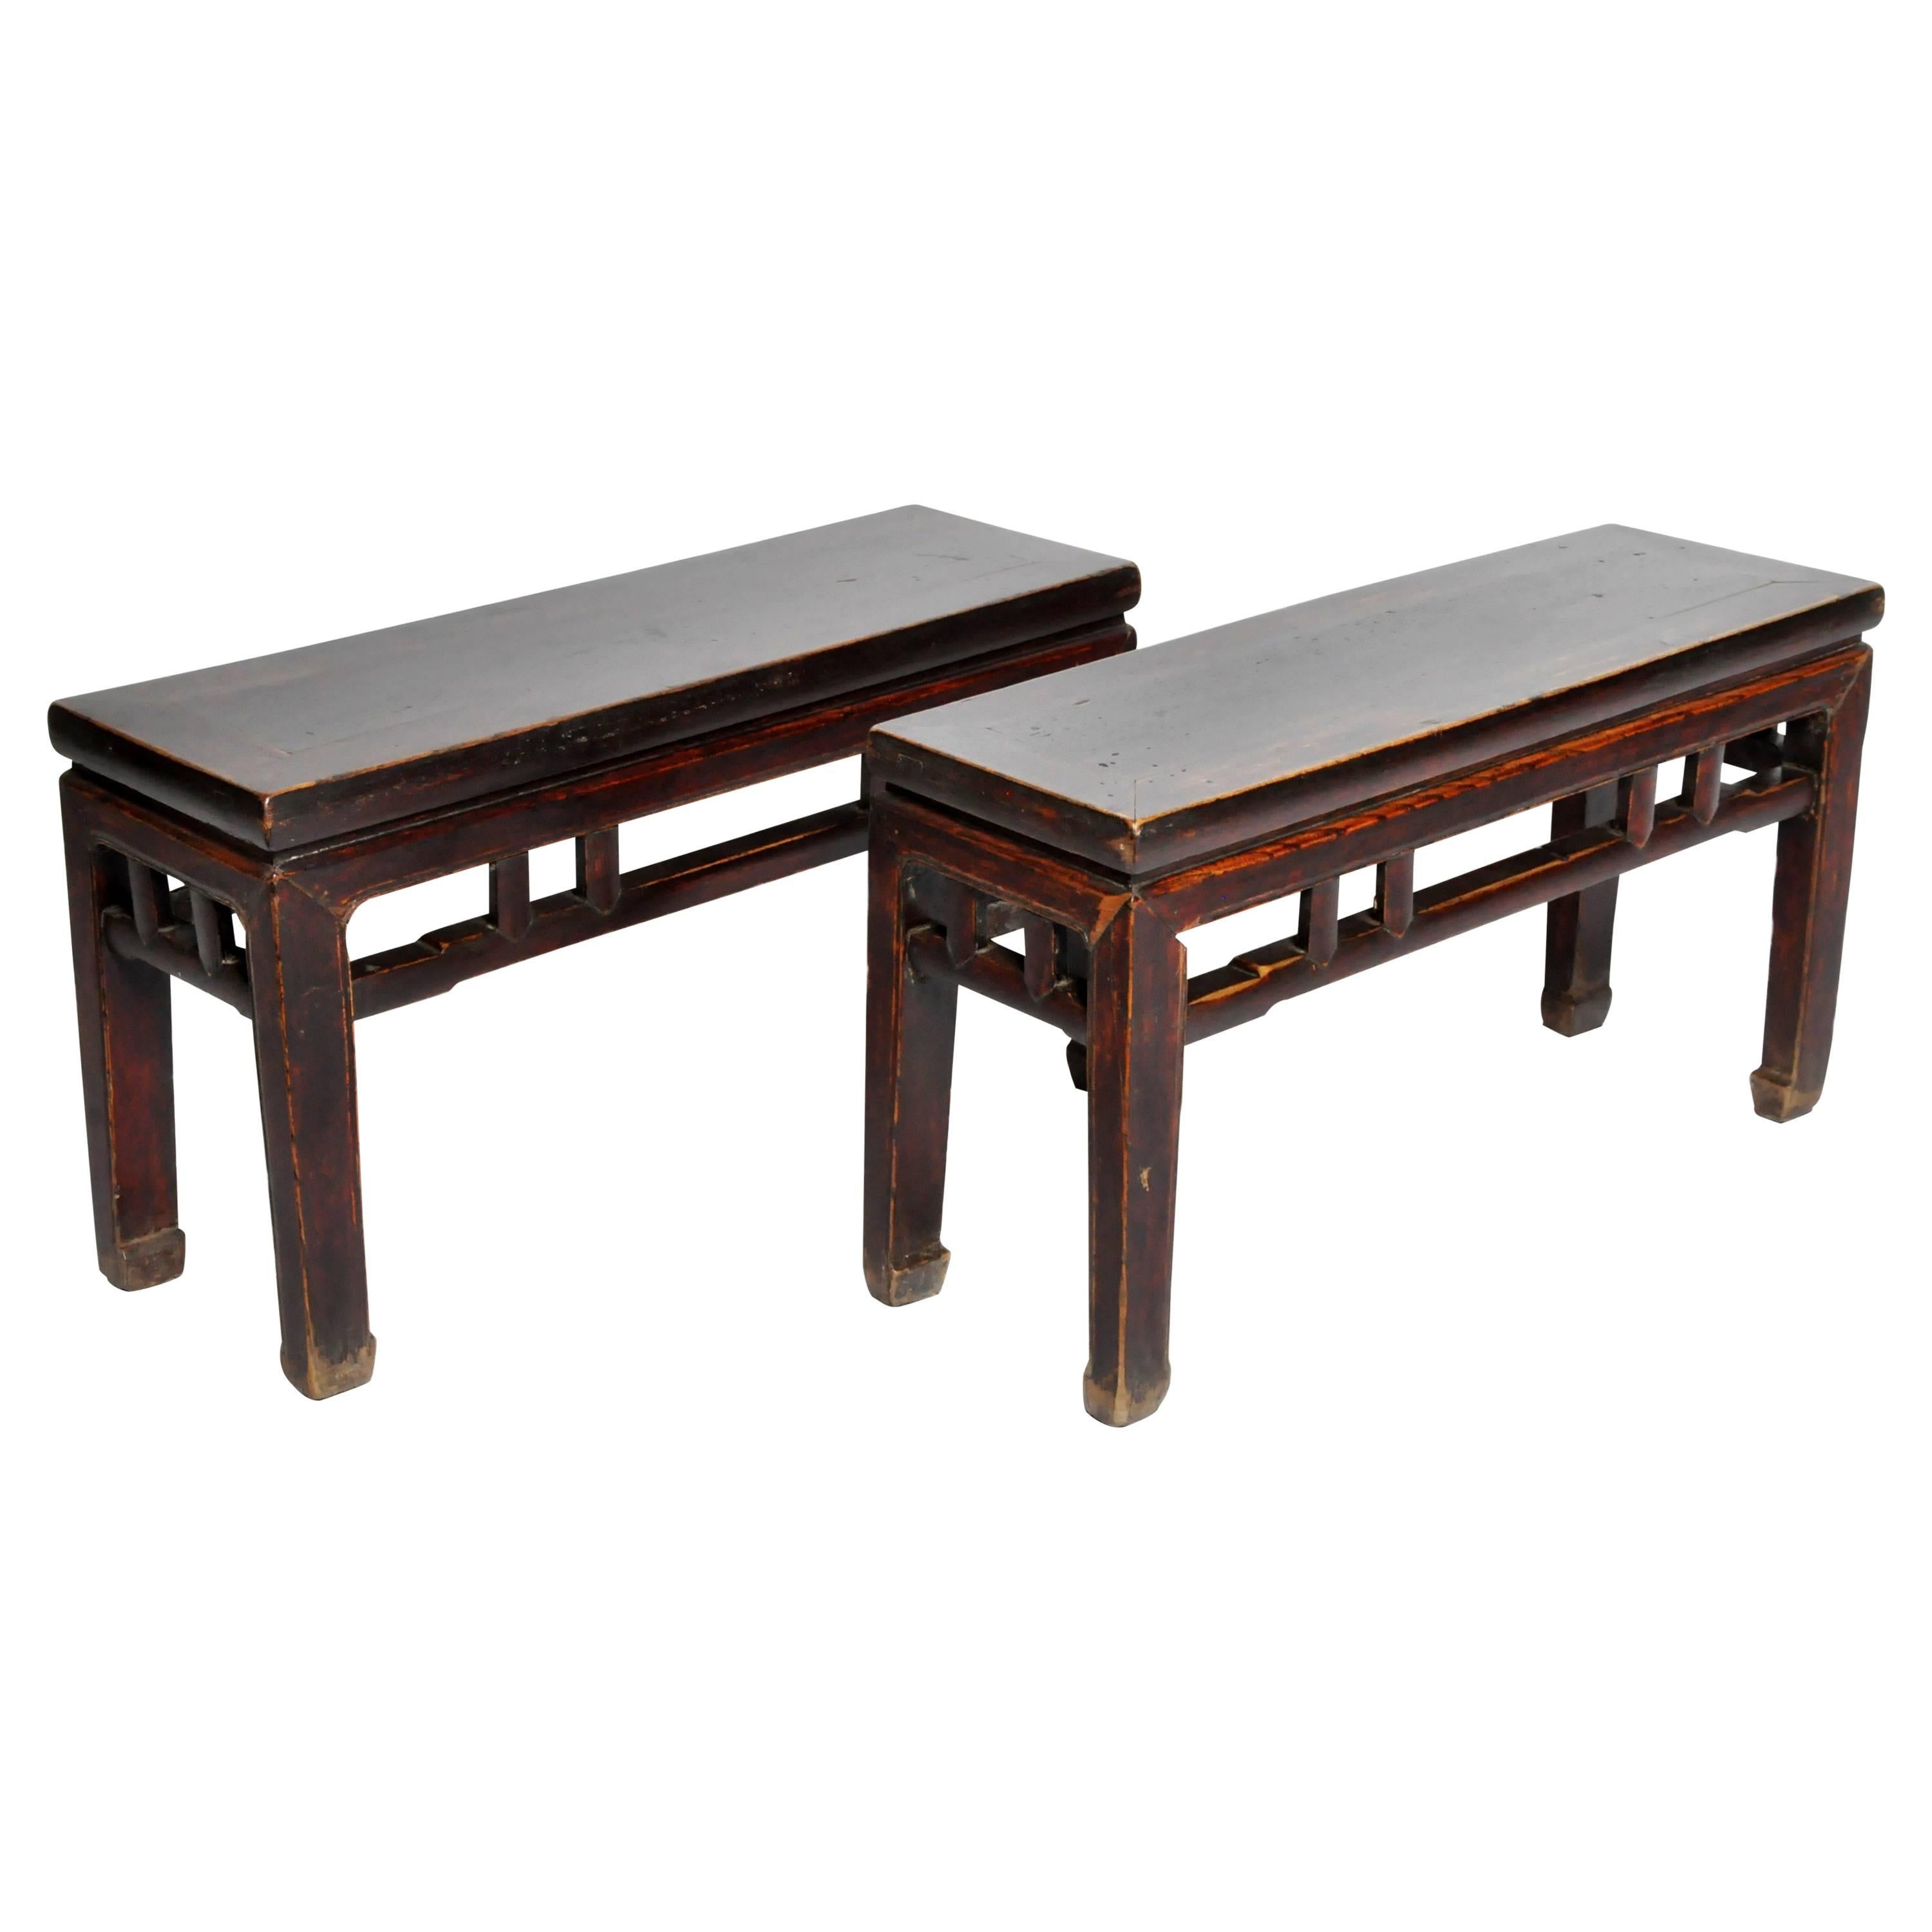 Qing Dynasty Rectangular Chinese Bench with Original Lacquer